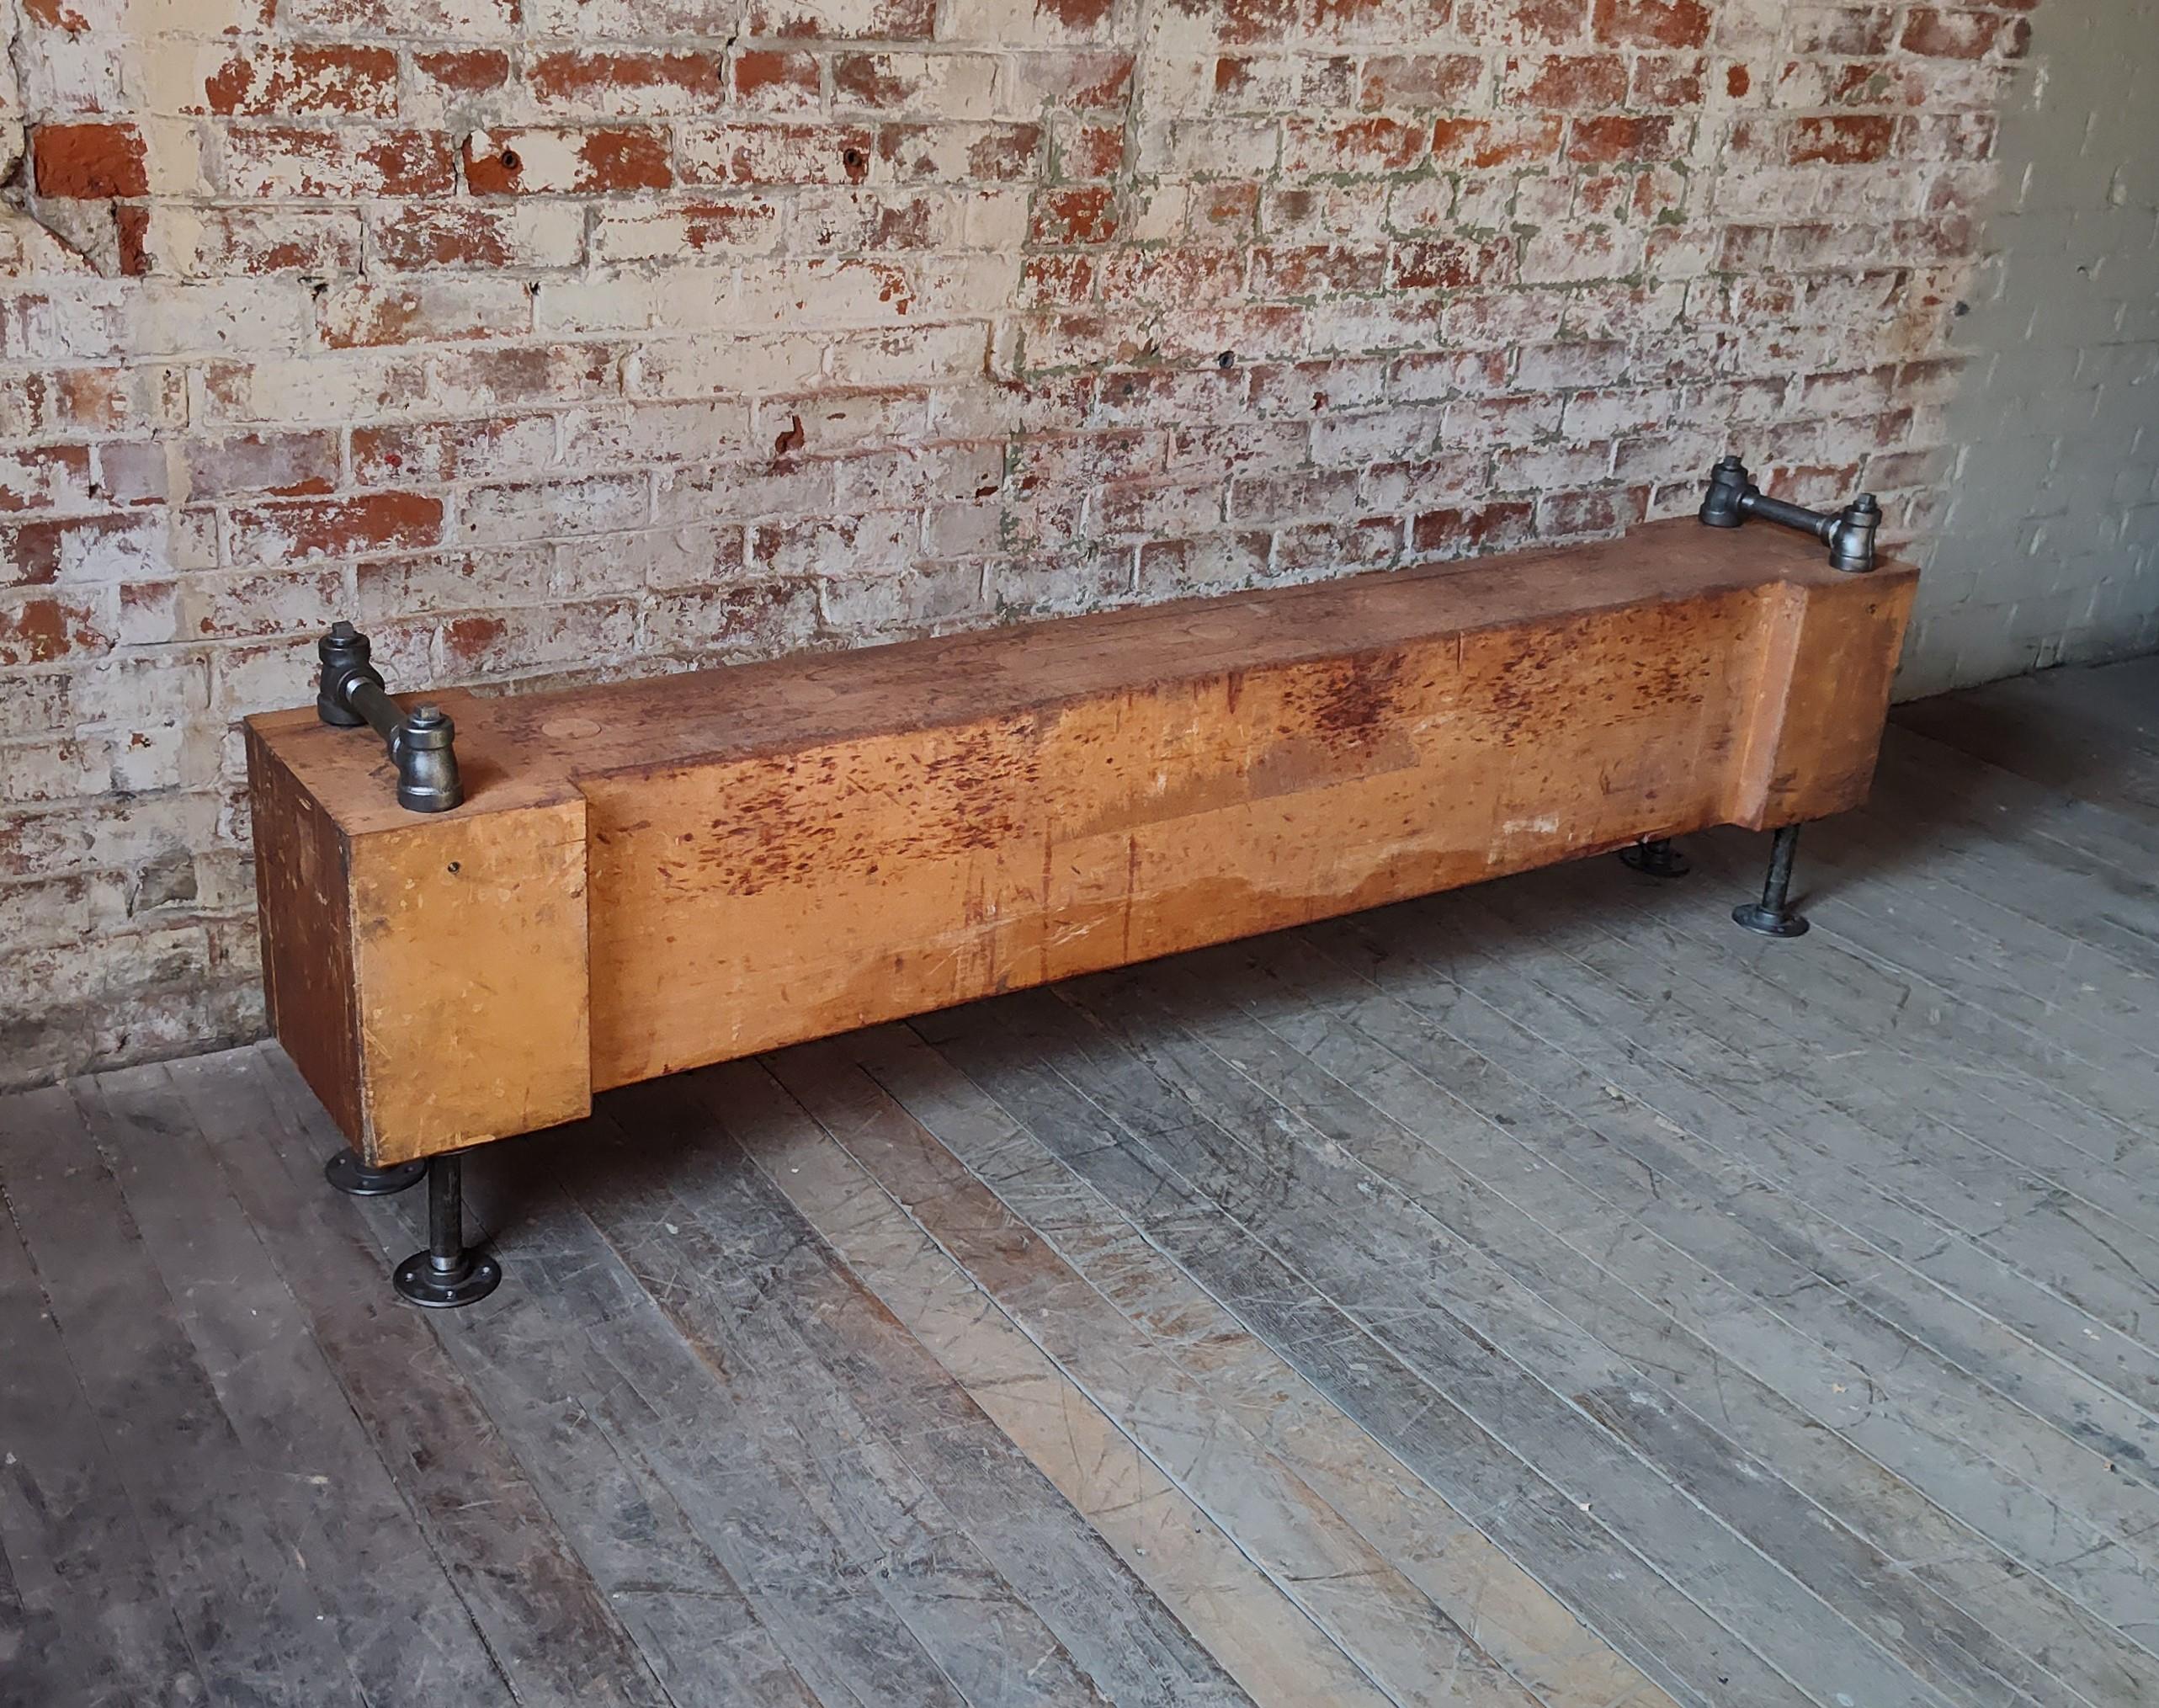 Wooden Factory Bench

Overall Dimensions: 11